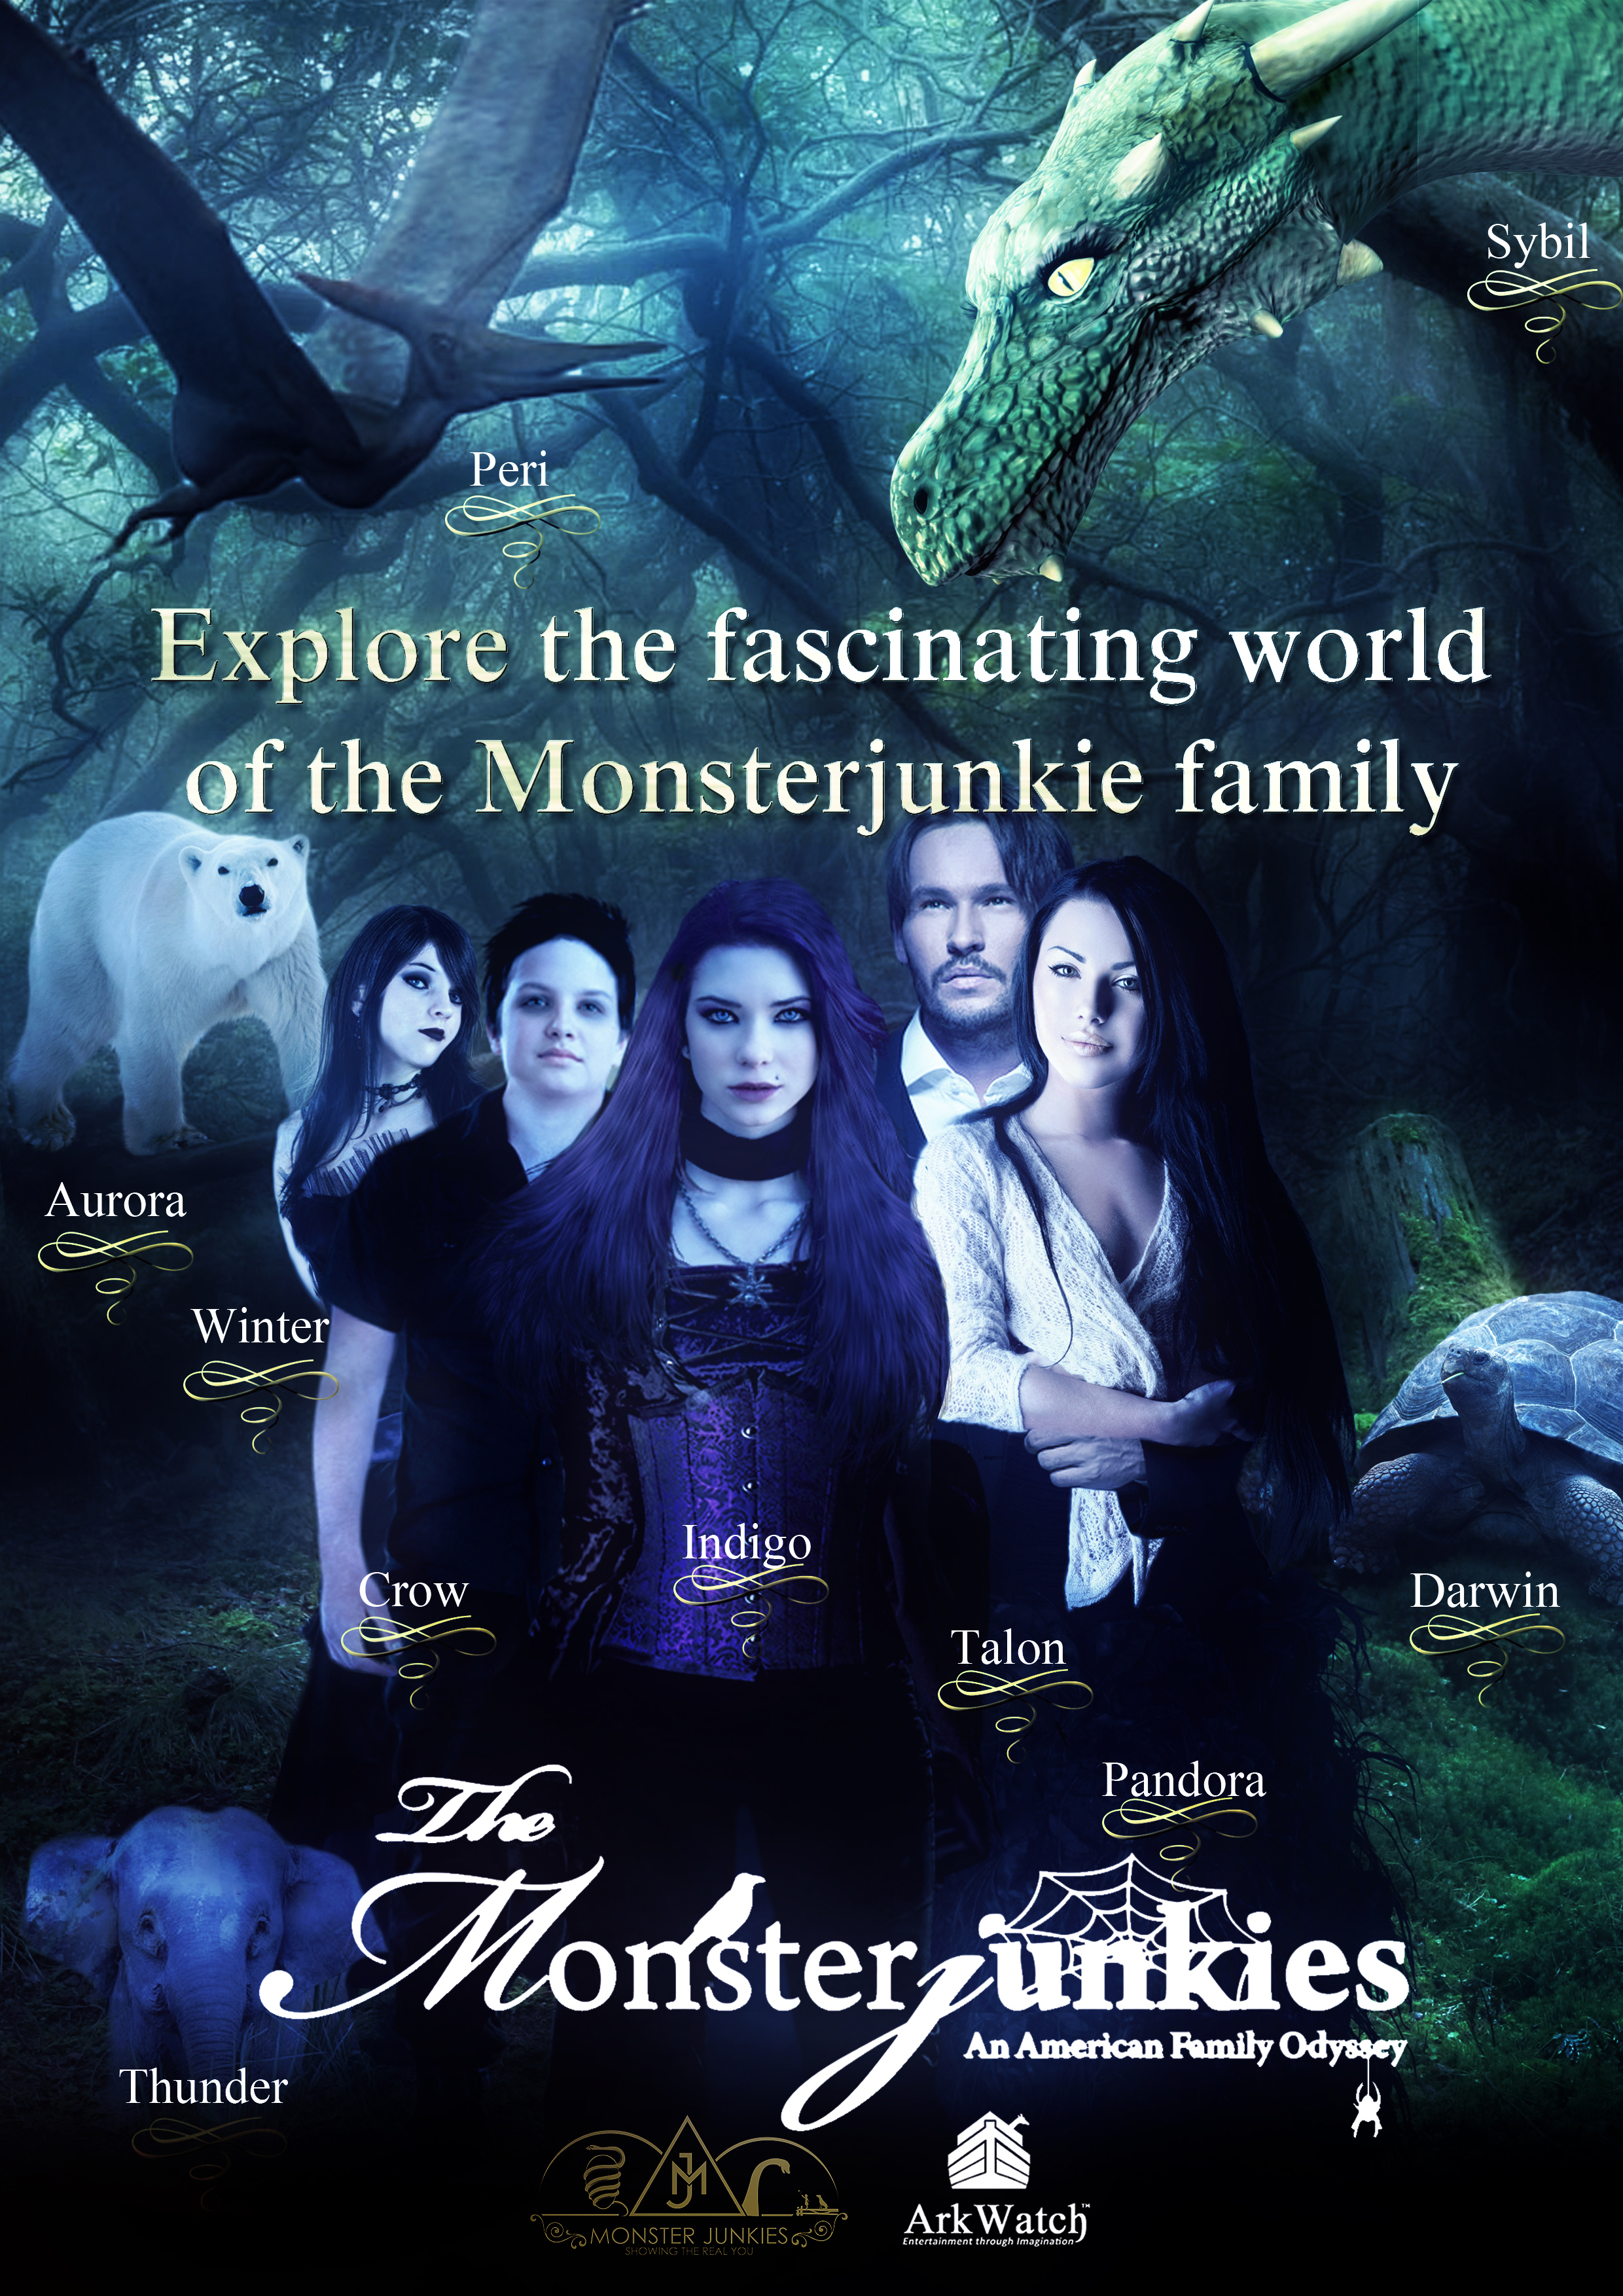 Meet the family the Monsterjunkies